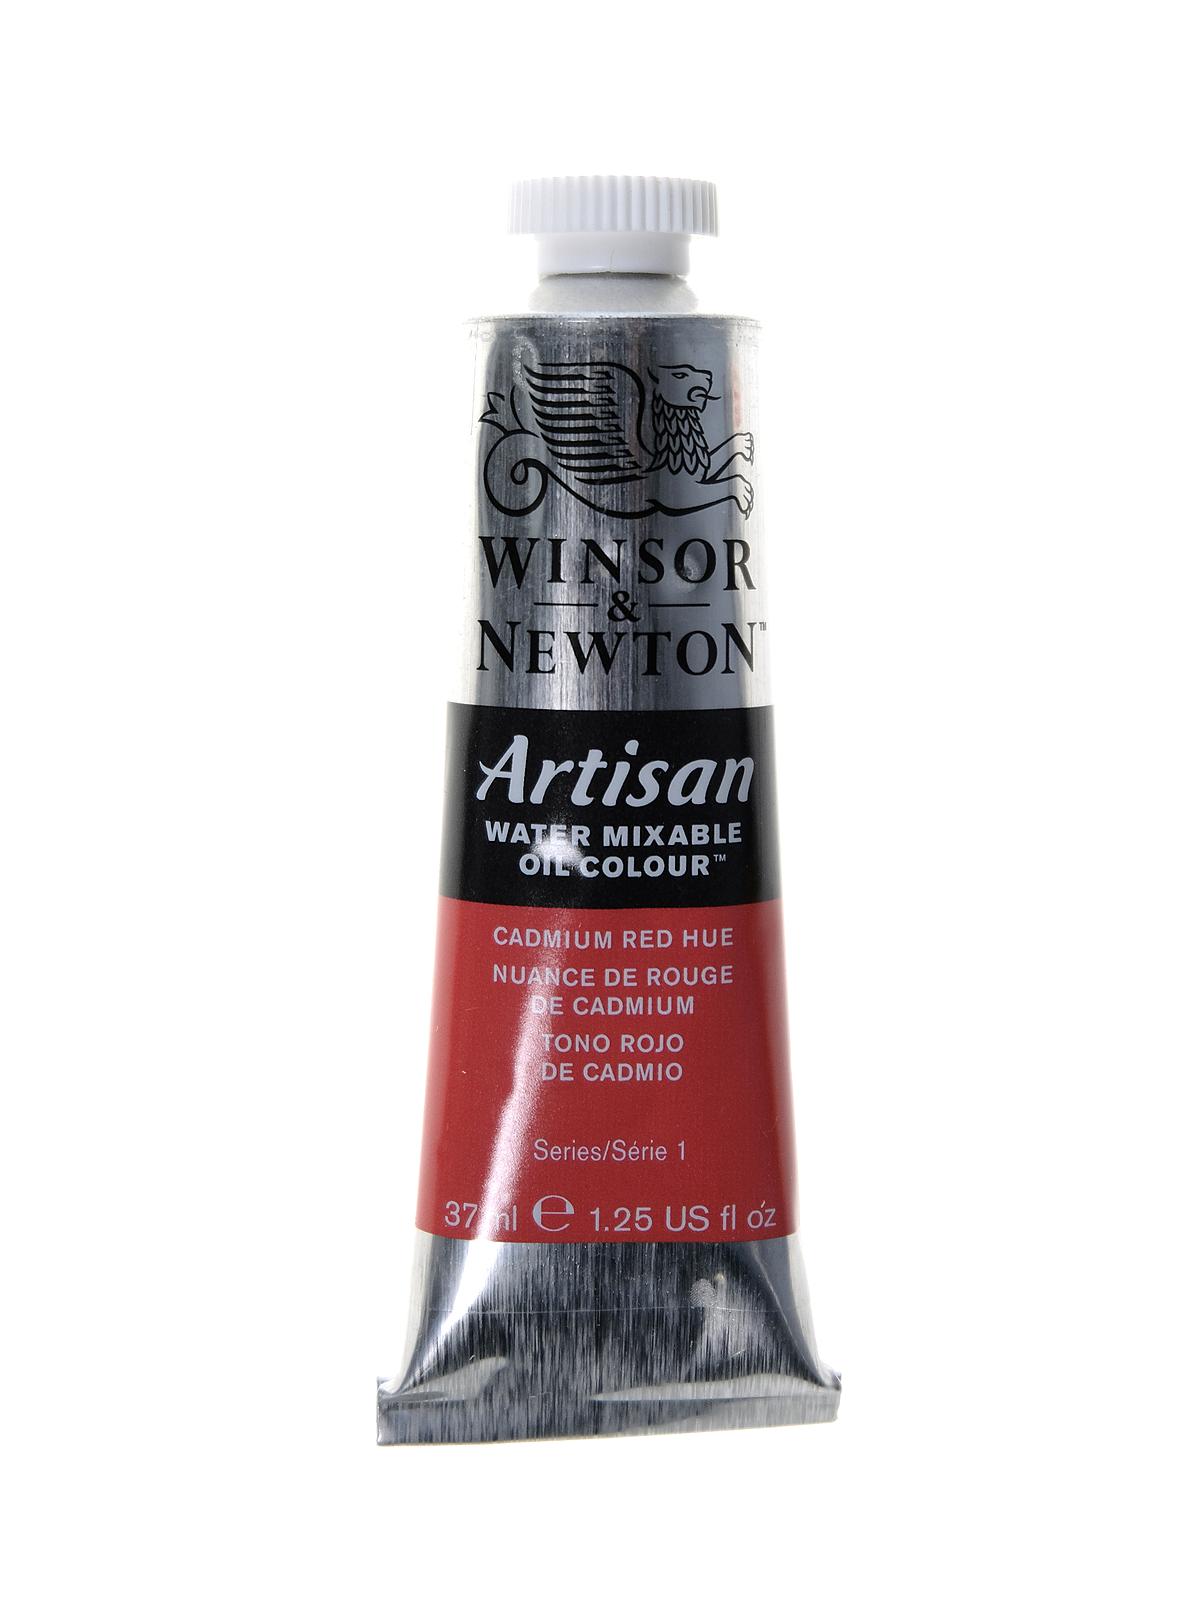 Artisan Water Mixable Oil Colours Cadmium Red Hue 37 Ml 95